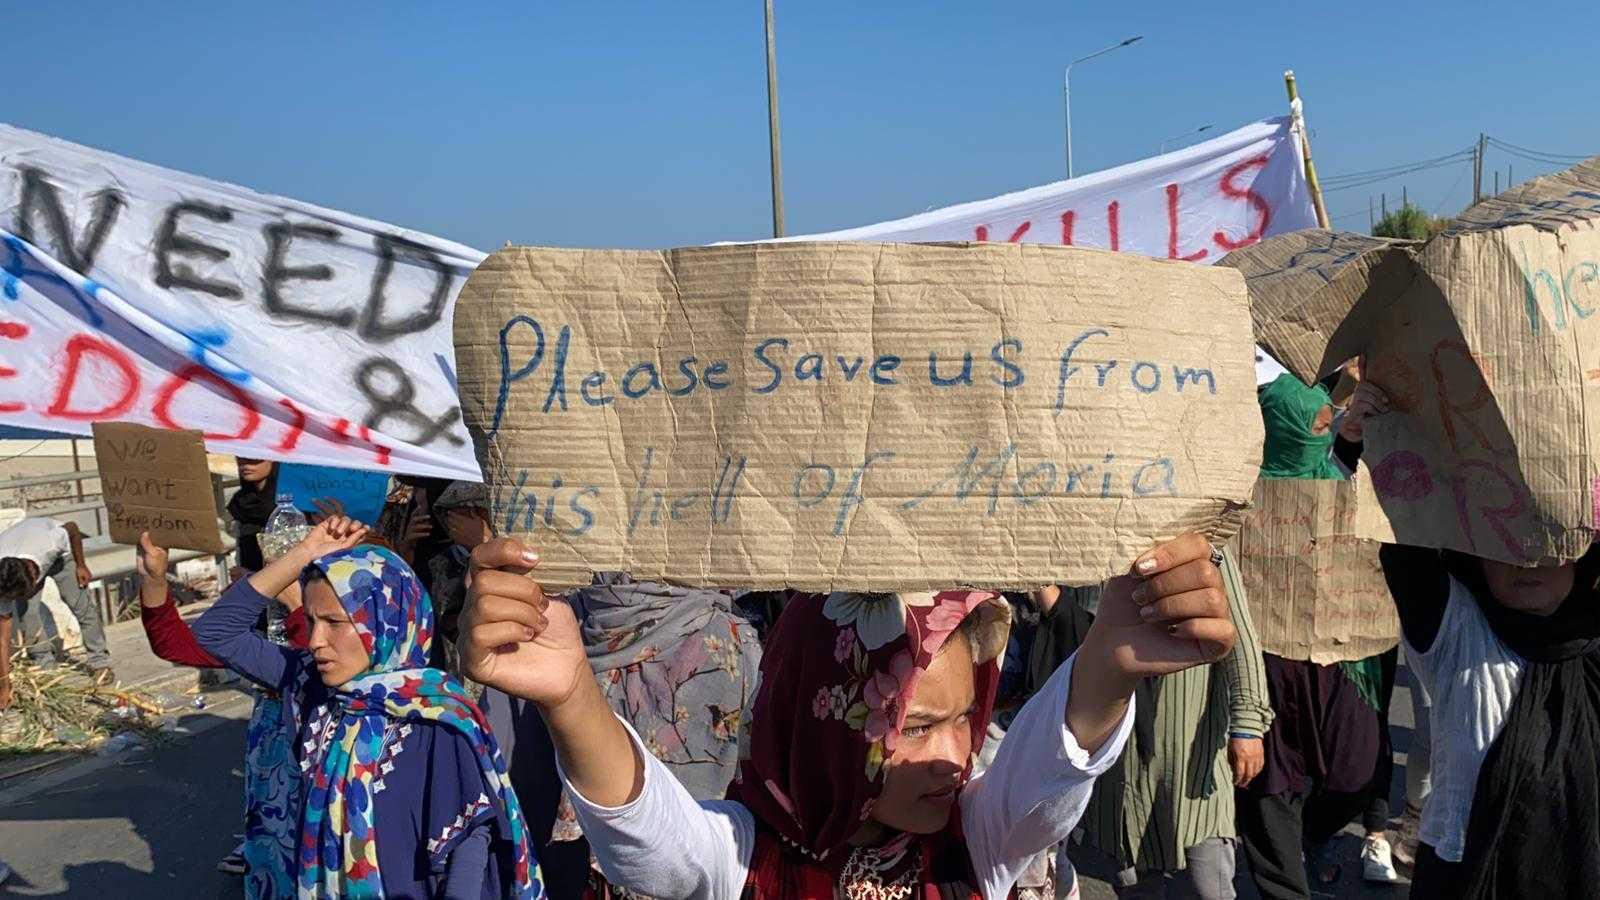 "Please save us from this hell of Moria" uchodźcy protestujący na Lesbos